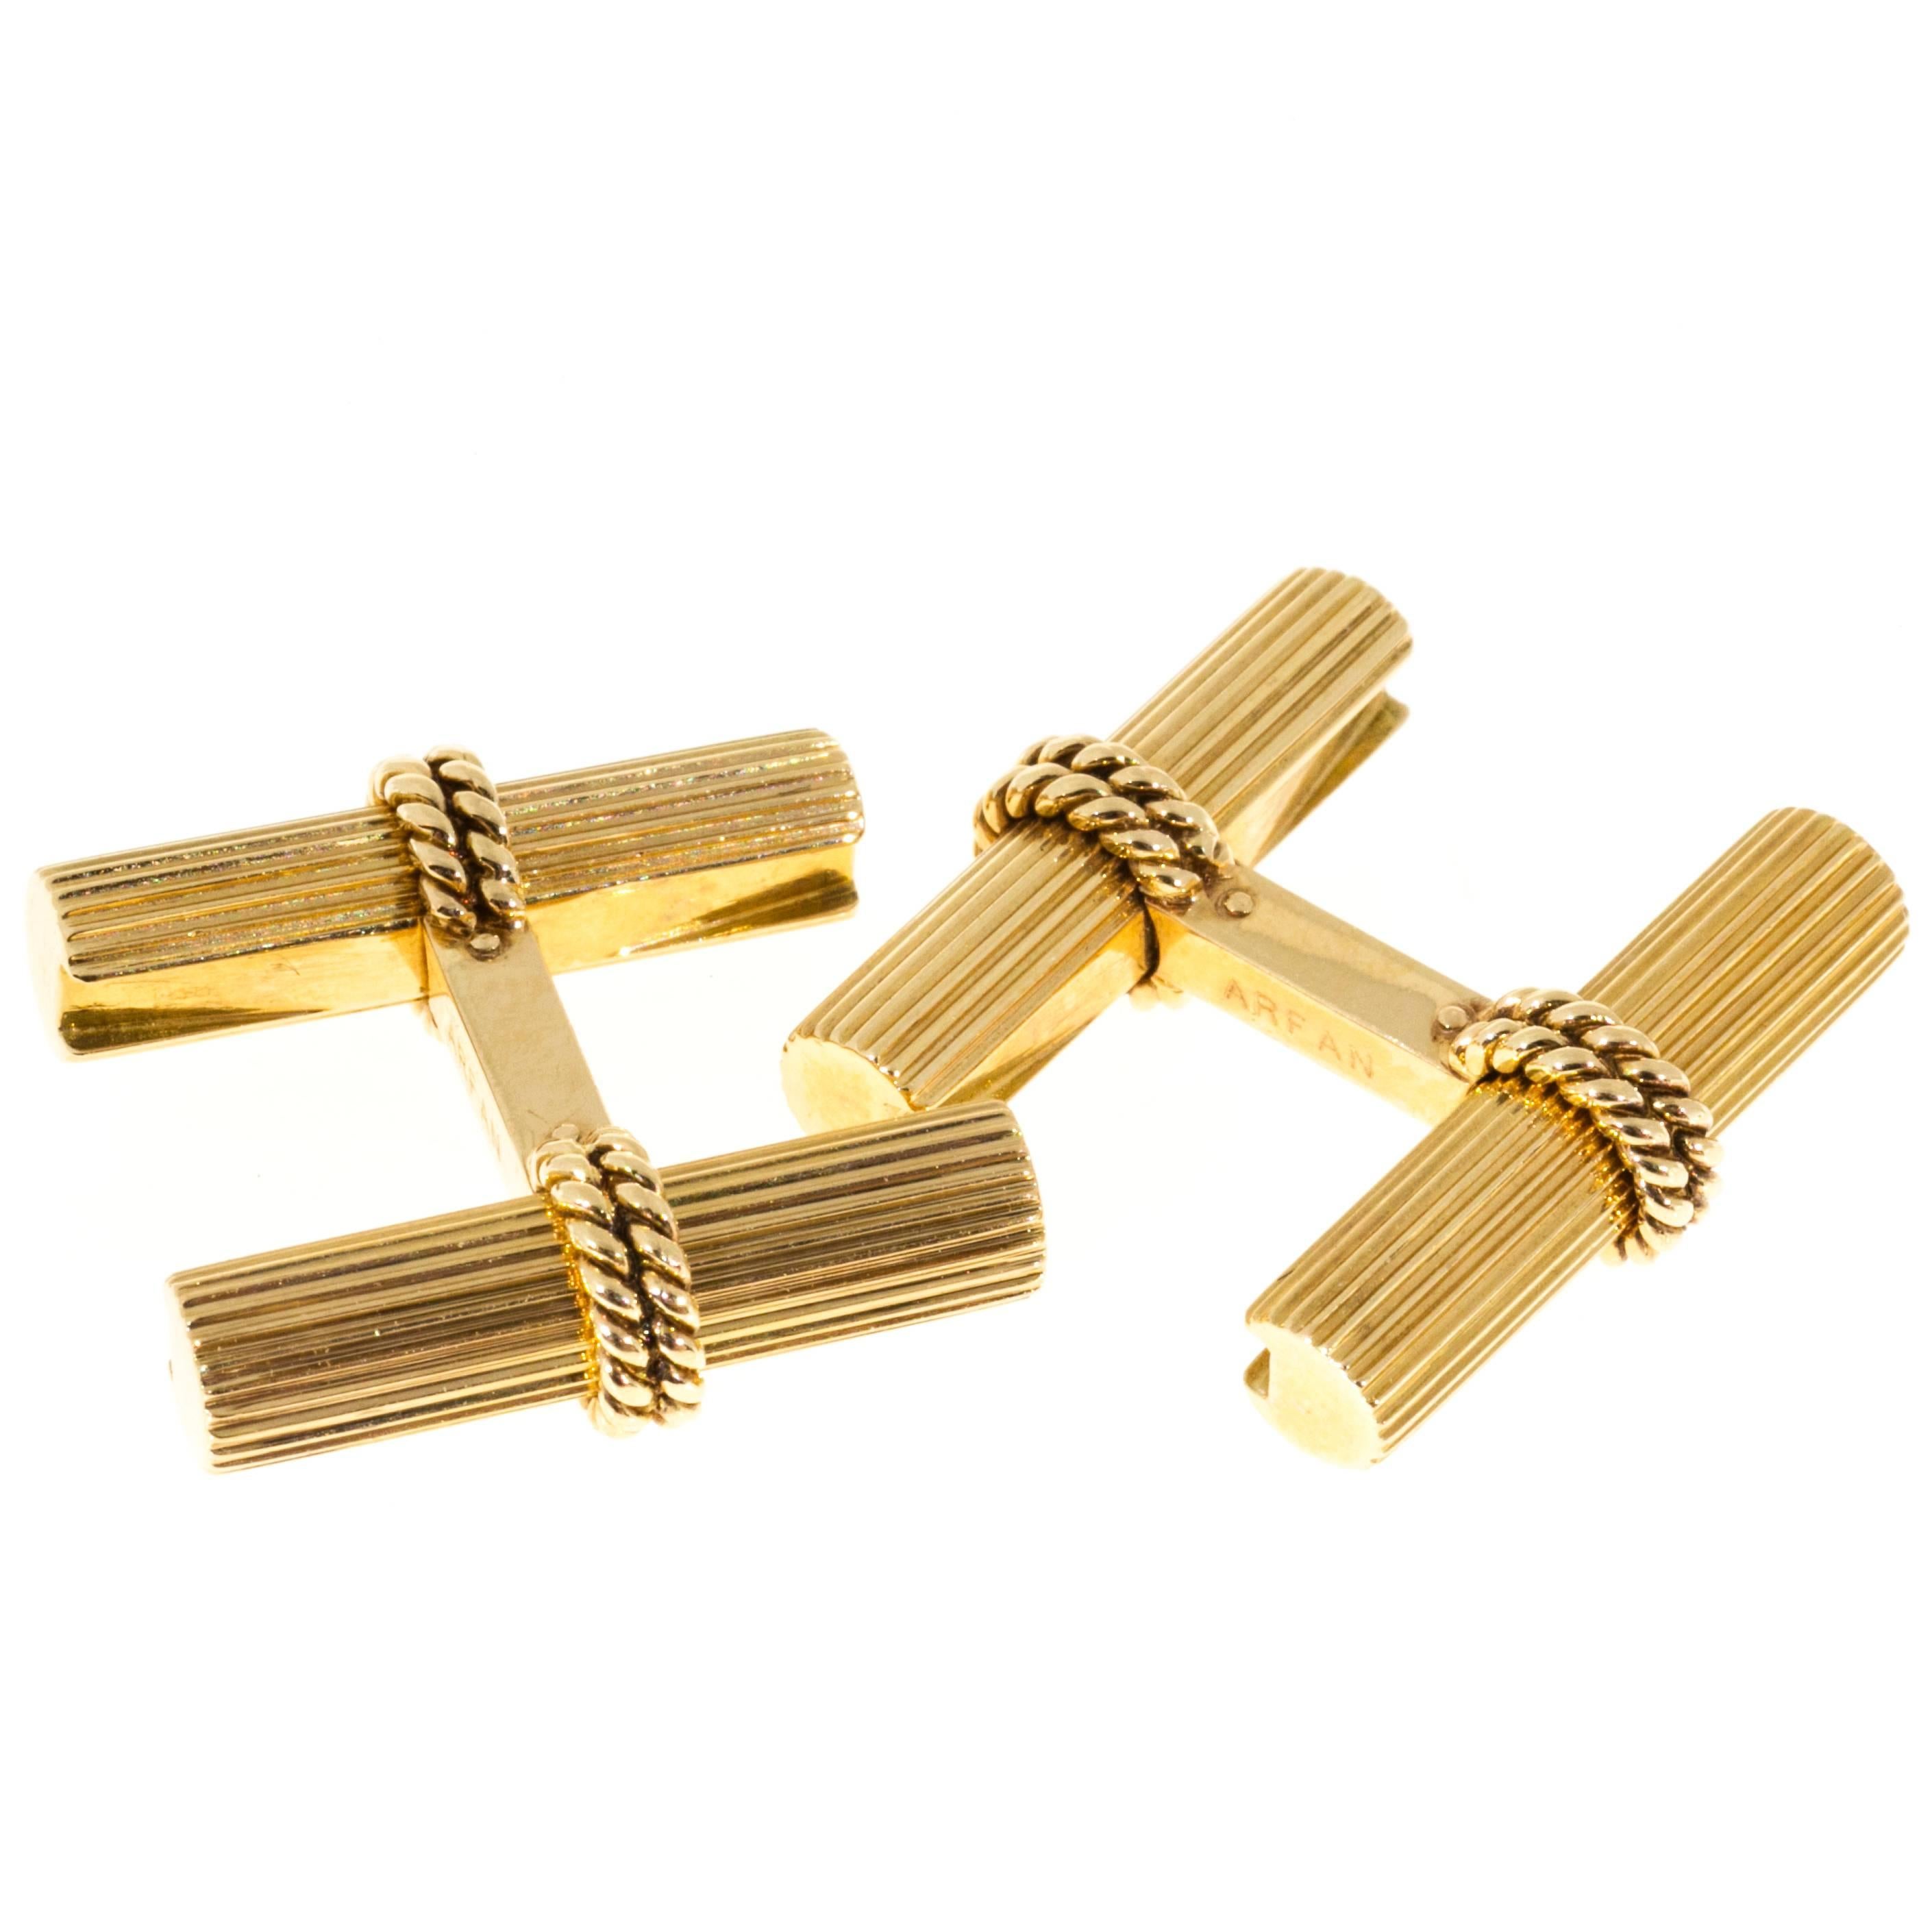 Arfan Tiger Eye Hematite Gold Ribbed Tube Cufflinks In Good Condition For Sale In Stamford, CT